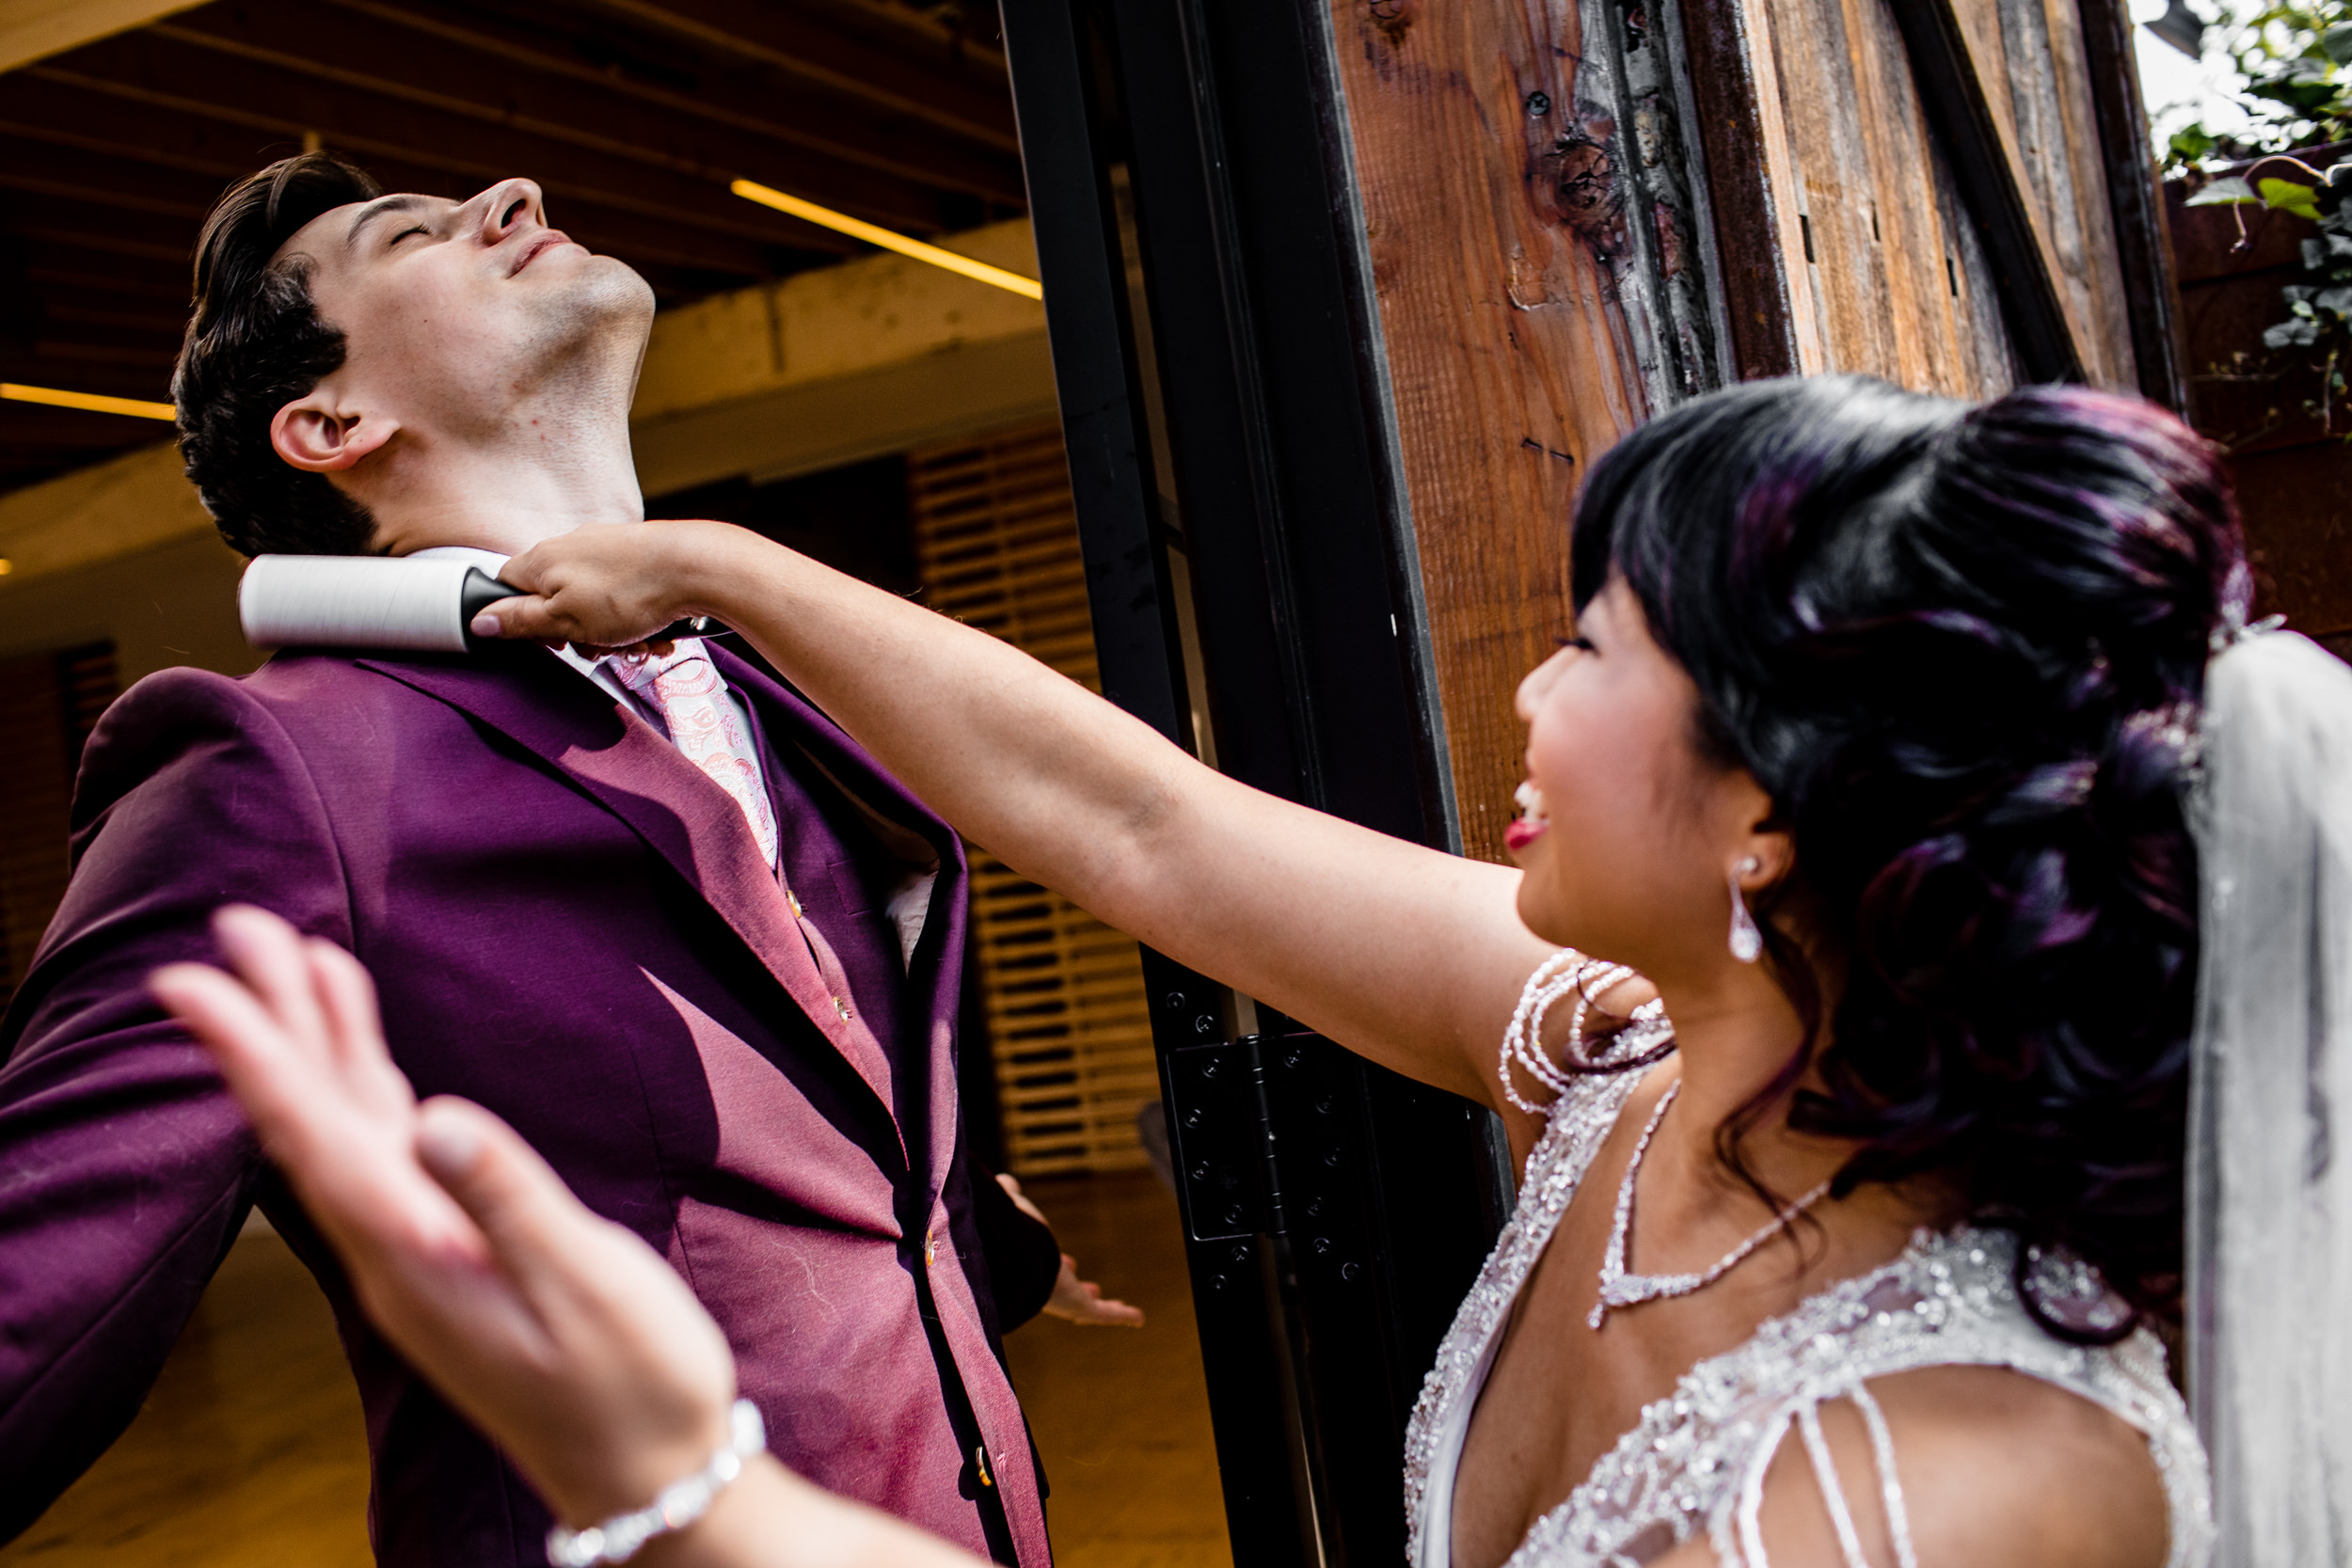 A bride uses a lint roller on her groom during a wedding ceremony at the Joinery.